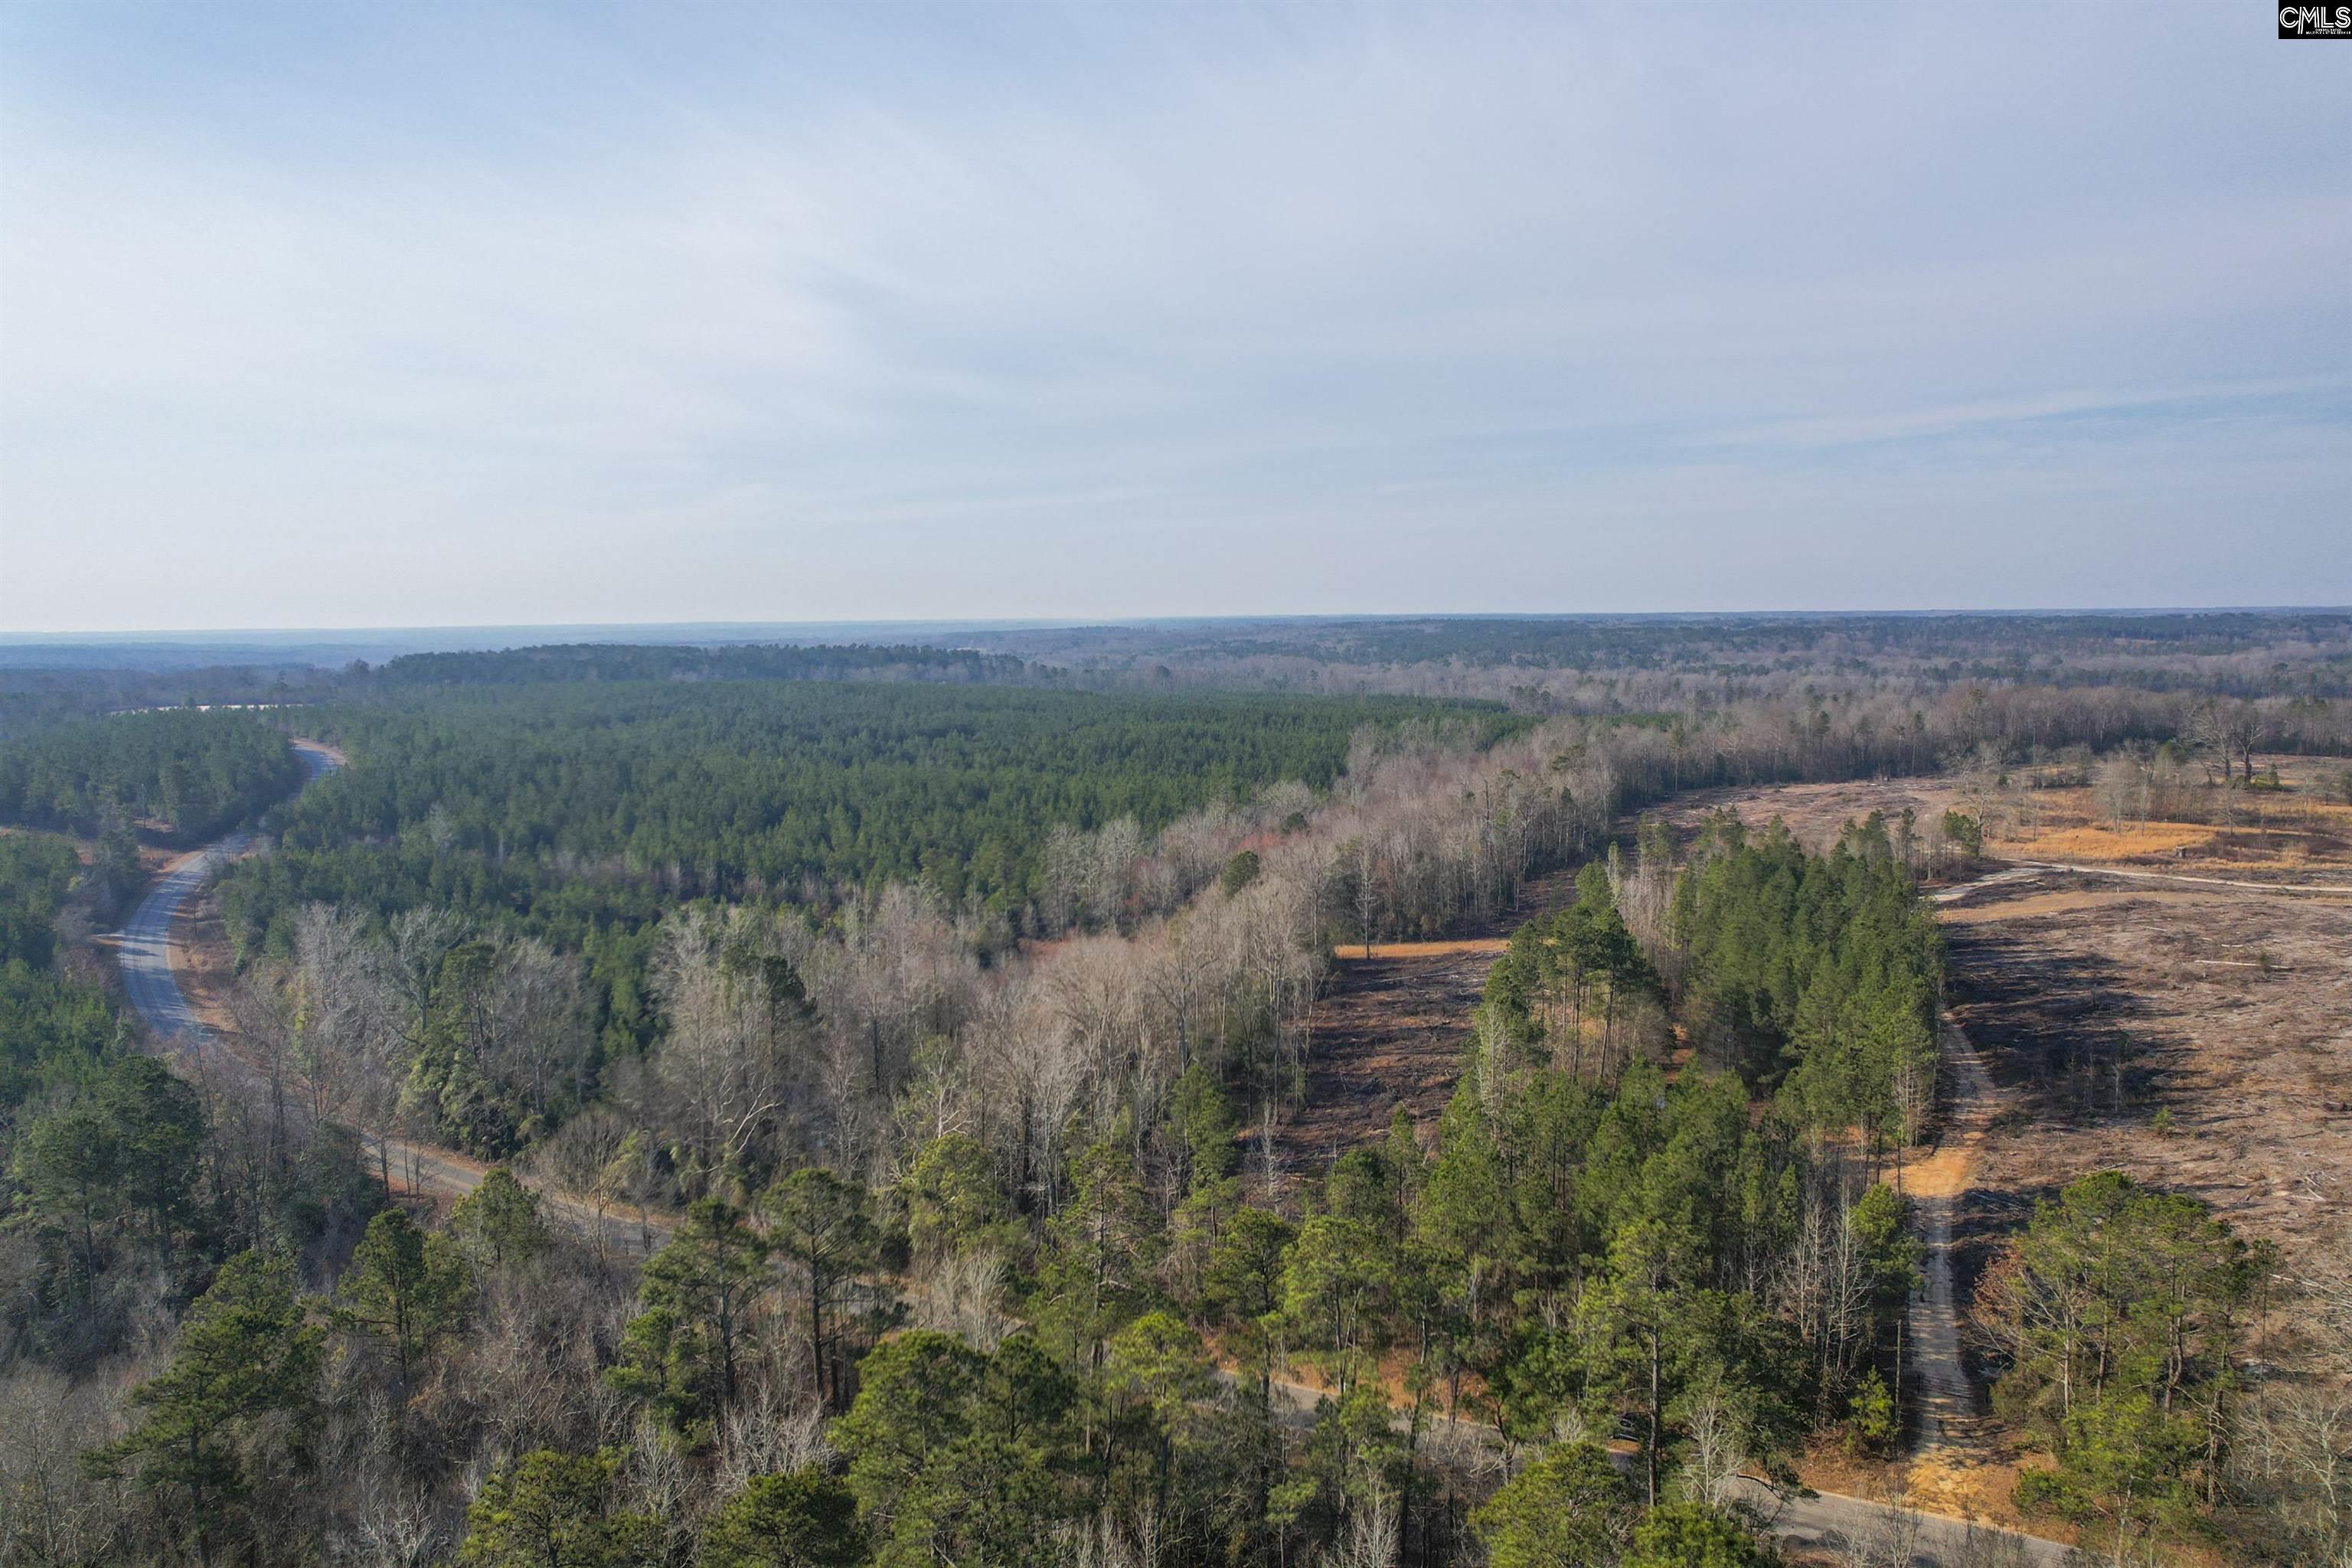  Lots For Sale - 703 Neds Creek, Kershaw, SC - 4 